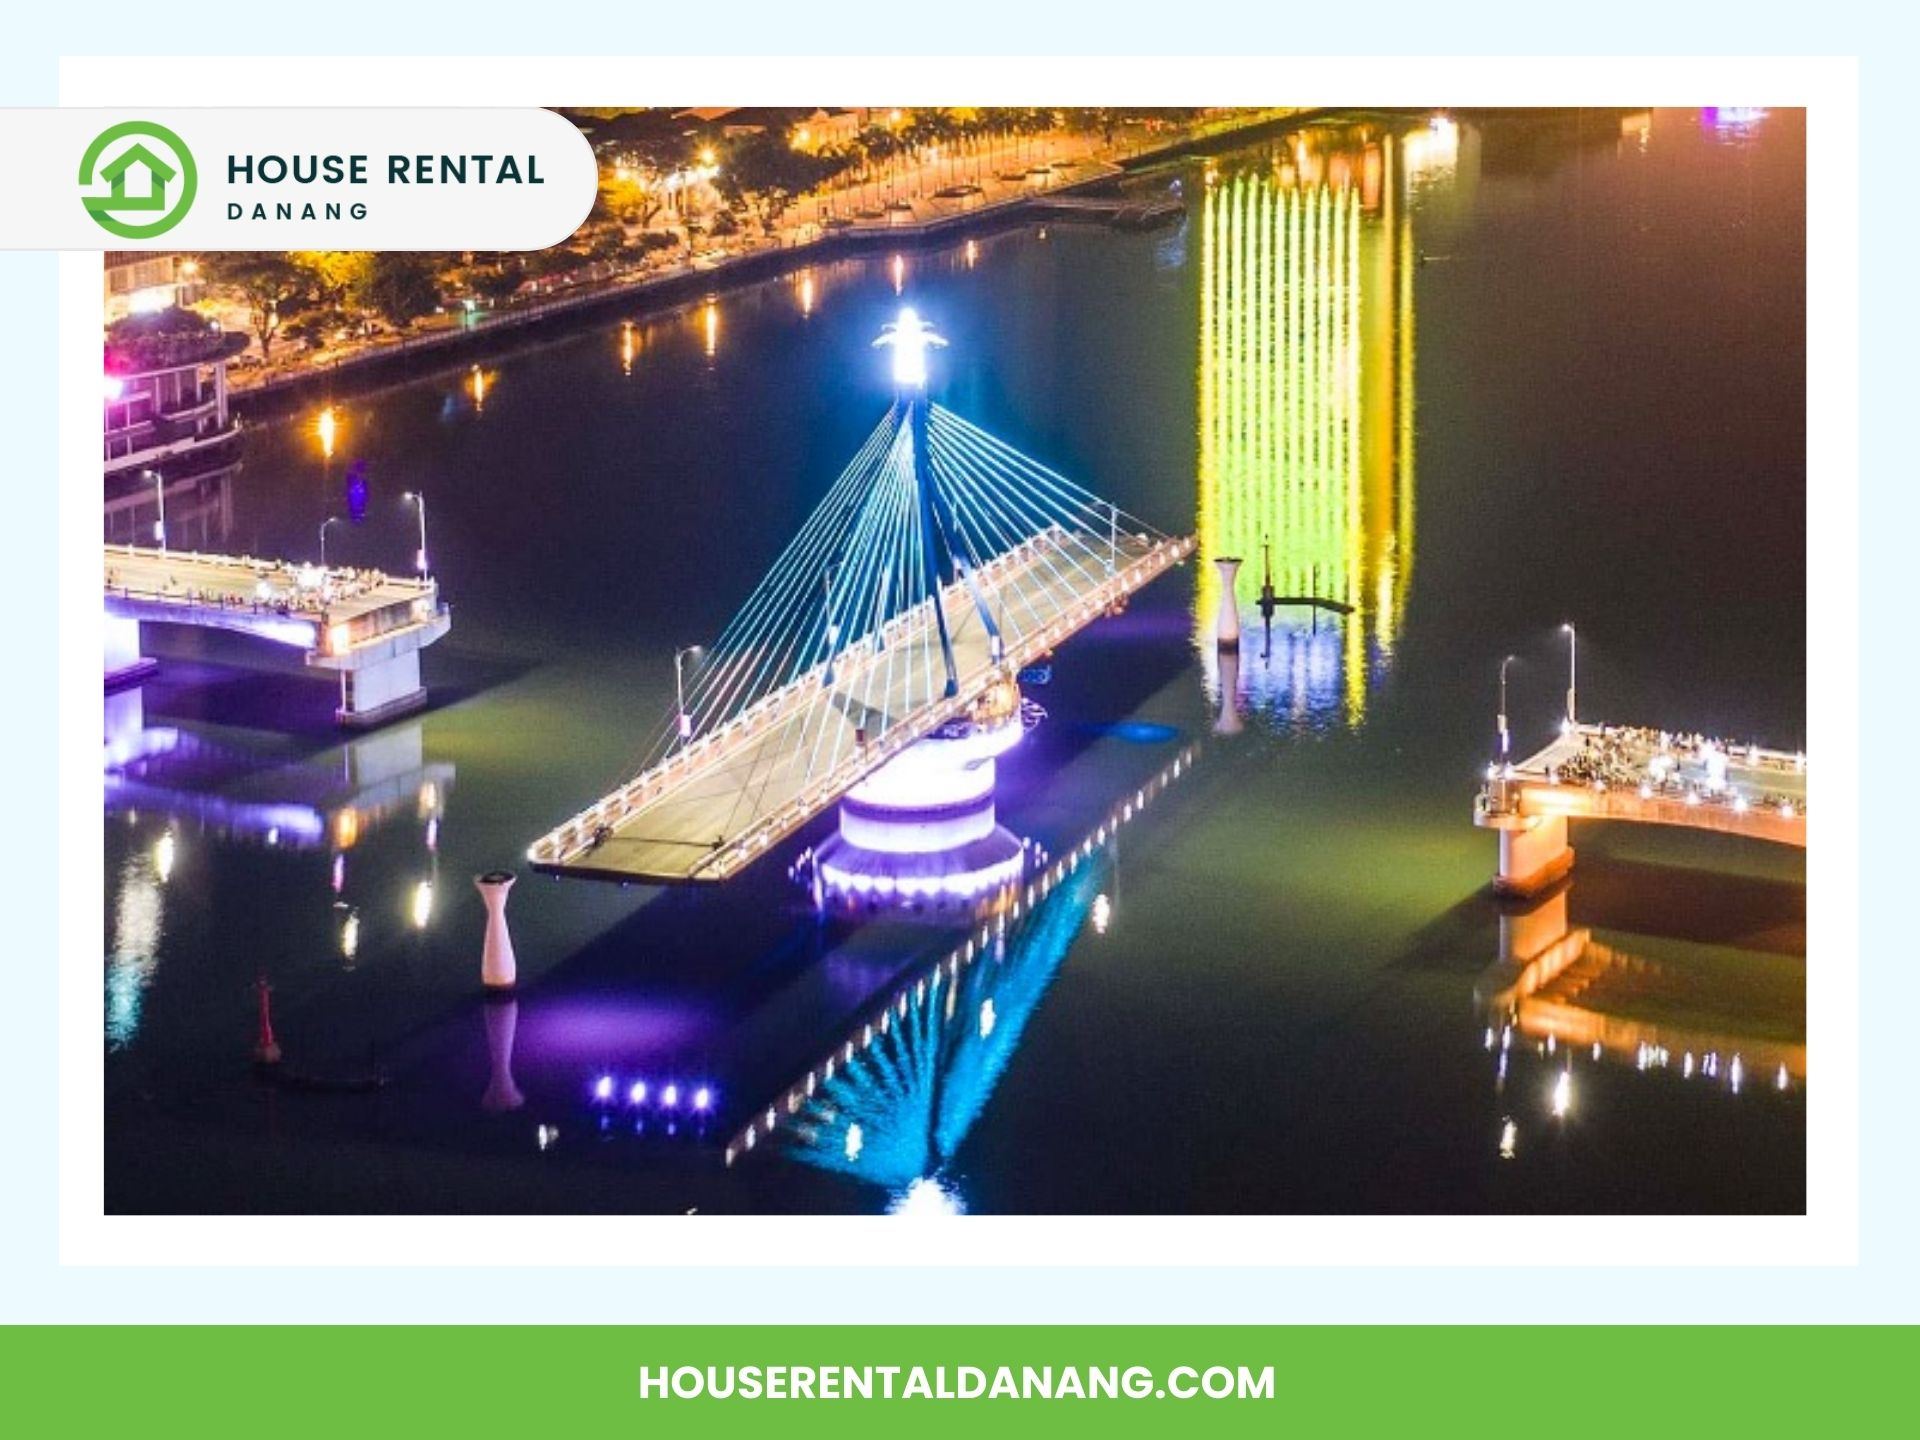 An illuminated Han River Bridge spans a river at night, with colorful lights reflecting on the water. Text on the image reads "House Rental Danang" and provides a website URL: houserentaldanang.com.